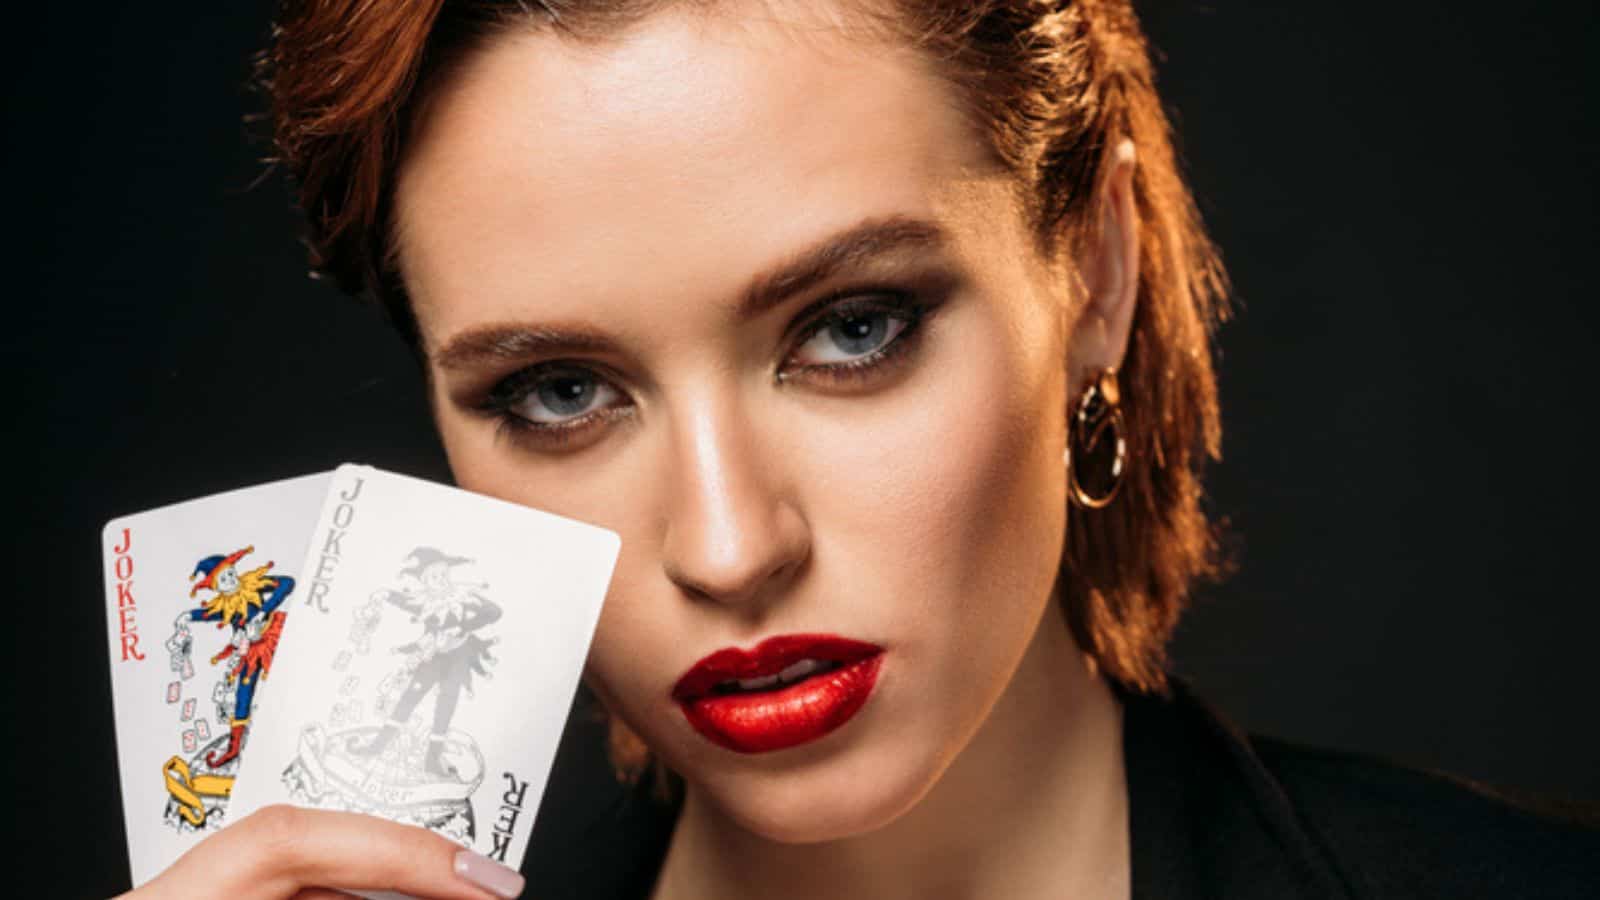 Portrait of attractive girl in red dress and black jacket holding cards